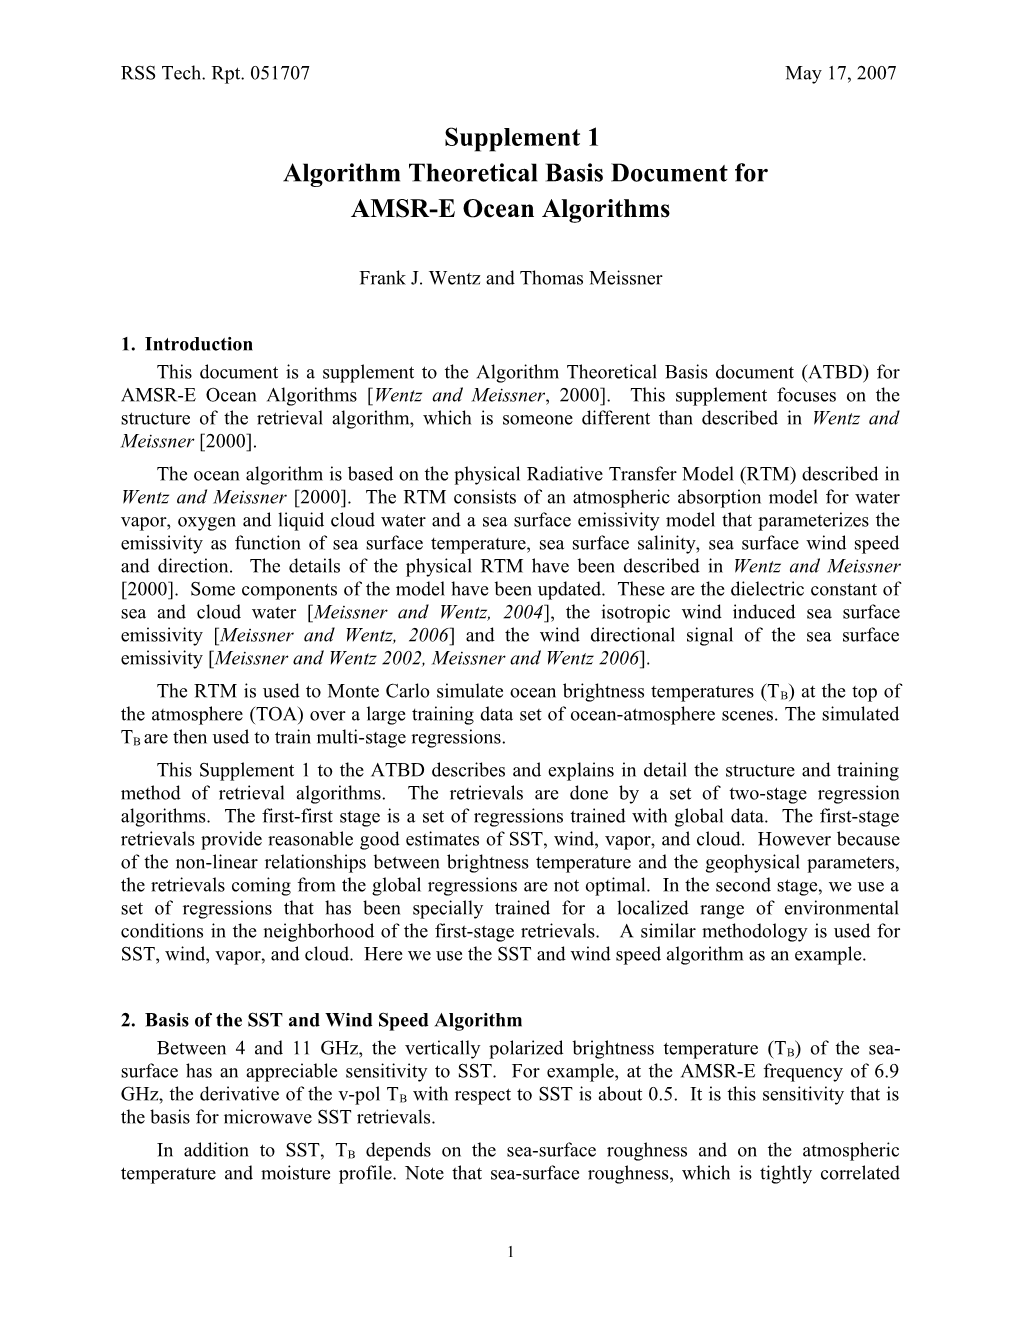 Algorithm Theoretical Basis Document For